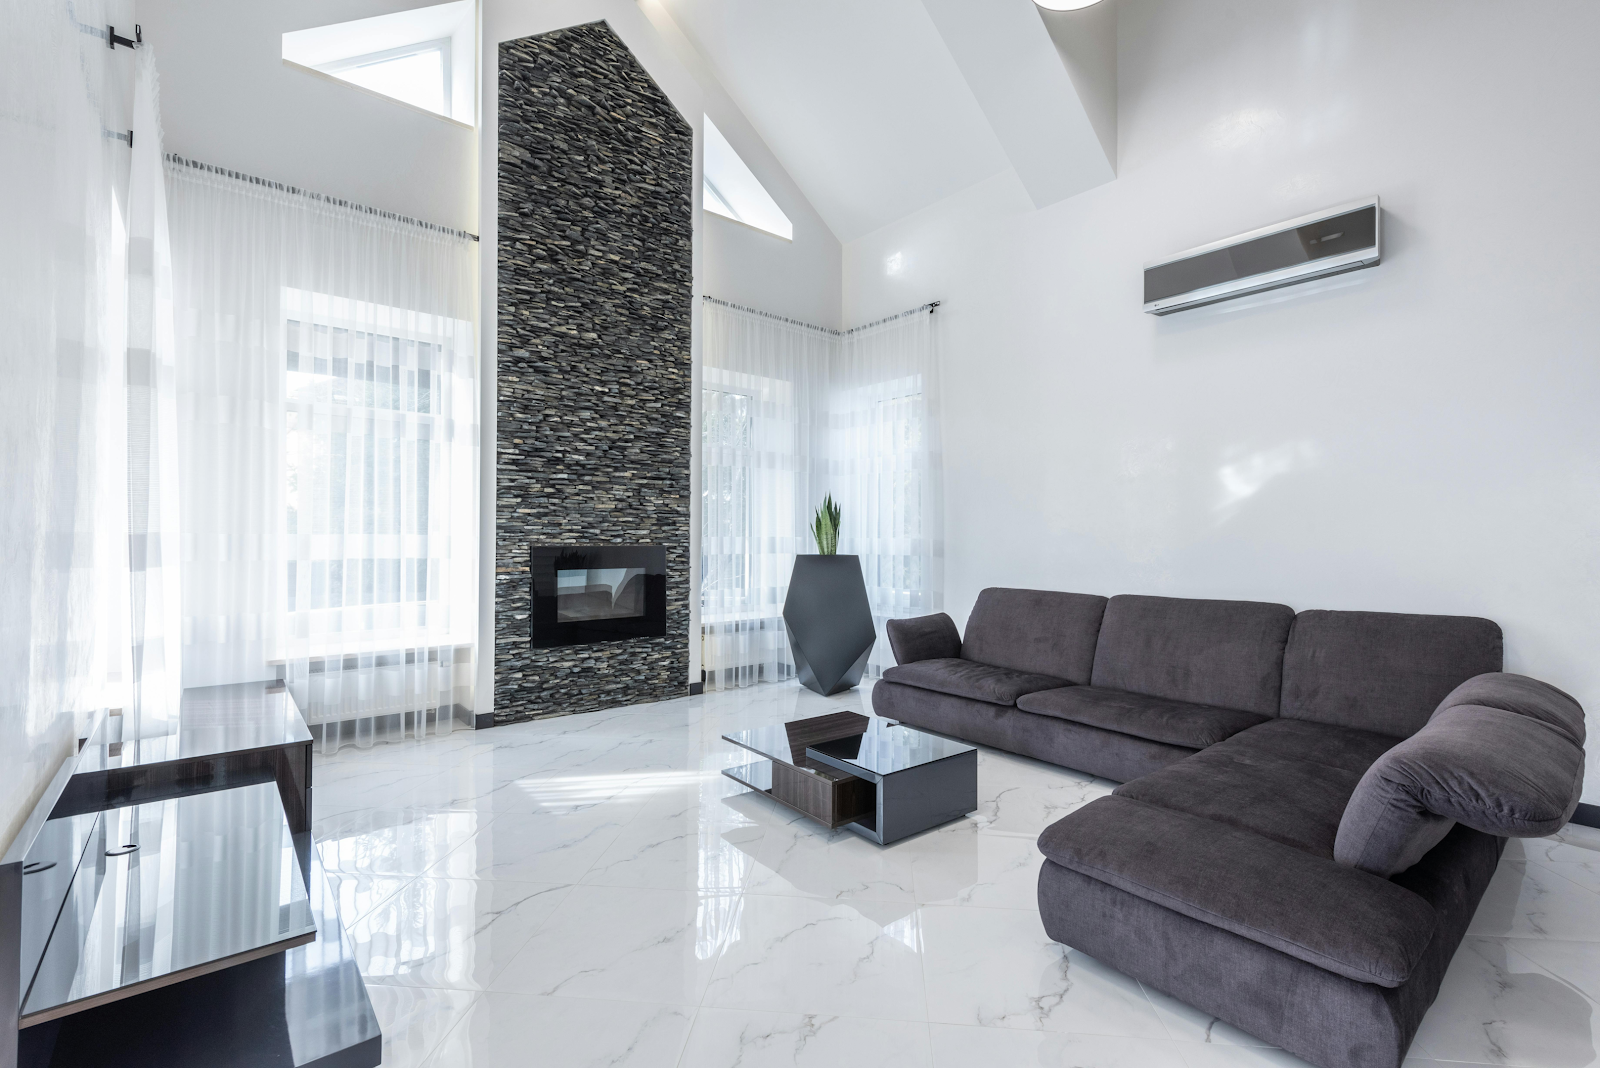 a living room in a house with an air conditioner on the wall